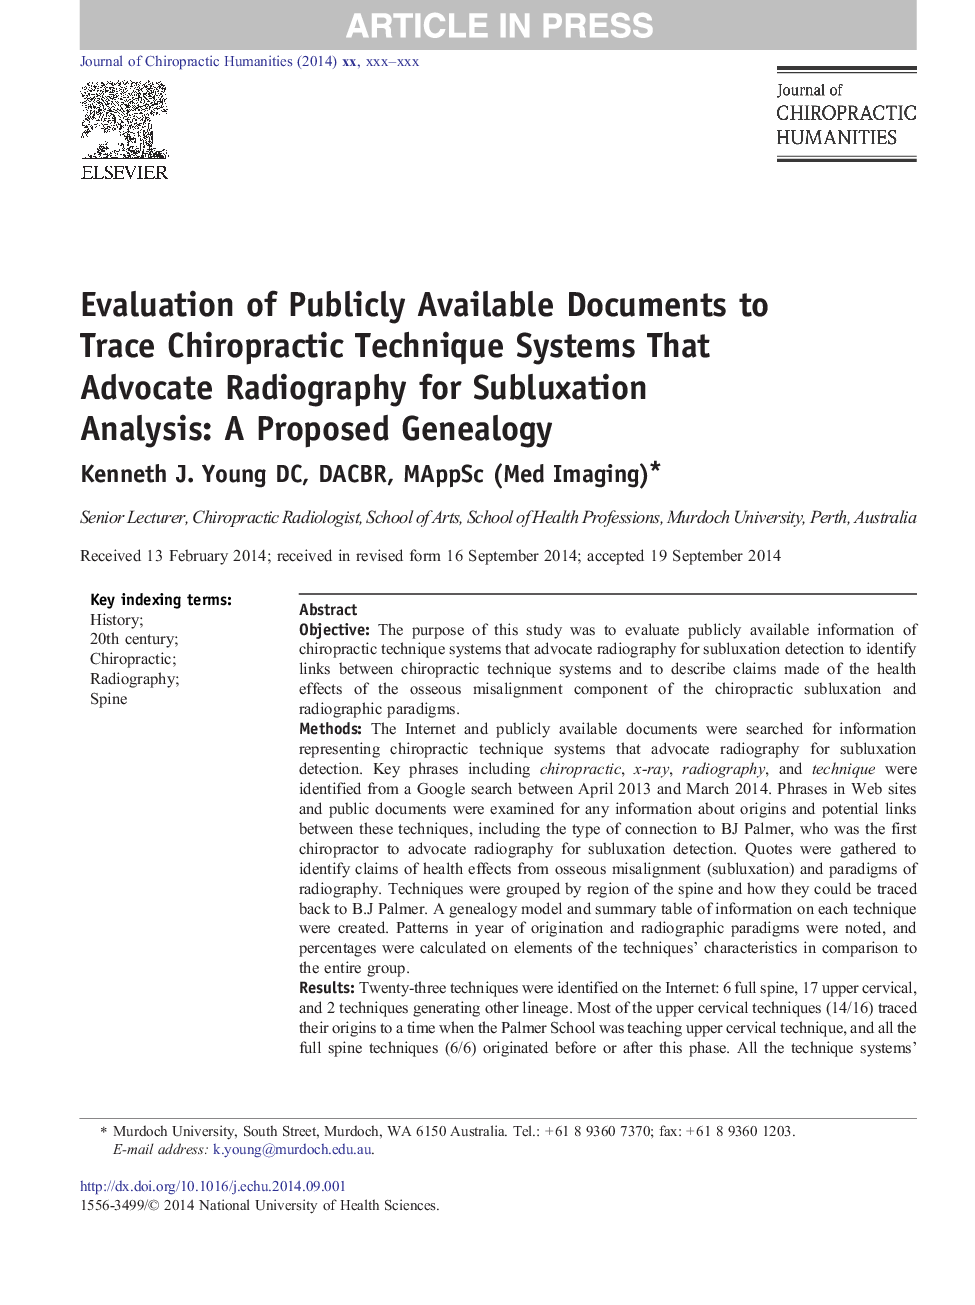 Evaluation of Publicly Available Documents to Trace Chiropractic Technique Systems That Advocate Radiography for Subluxation Analysis: A Proposed Genealogy